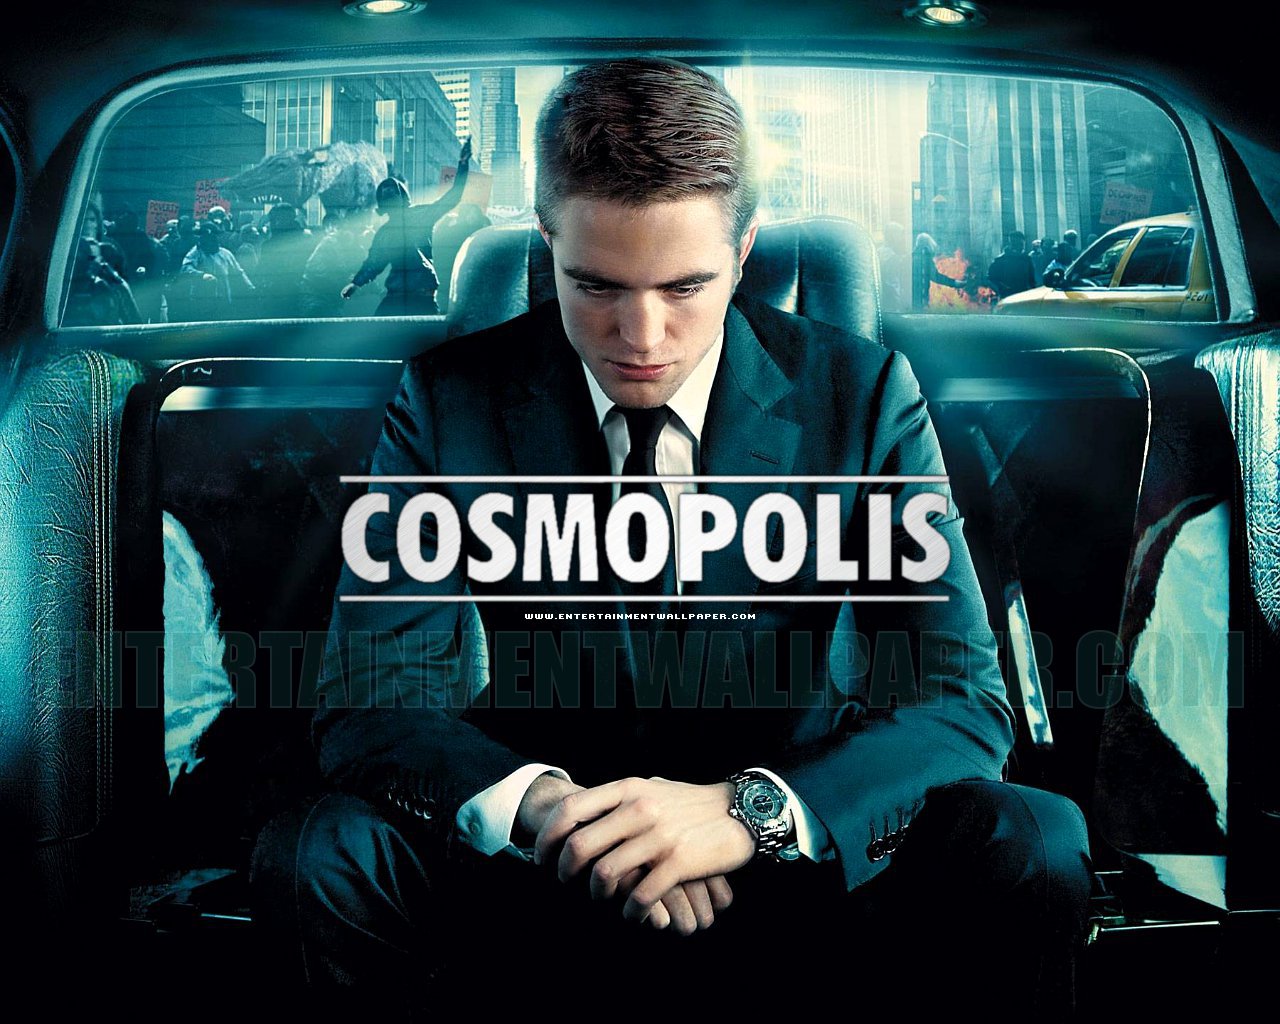 Nice Images Collection: Cosmopolis Desktop Wallpapers